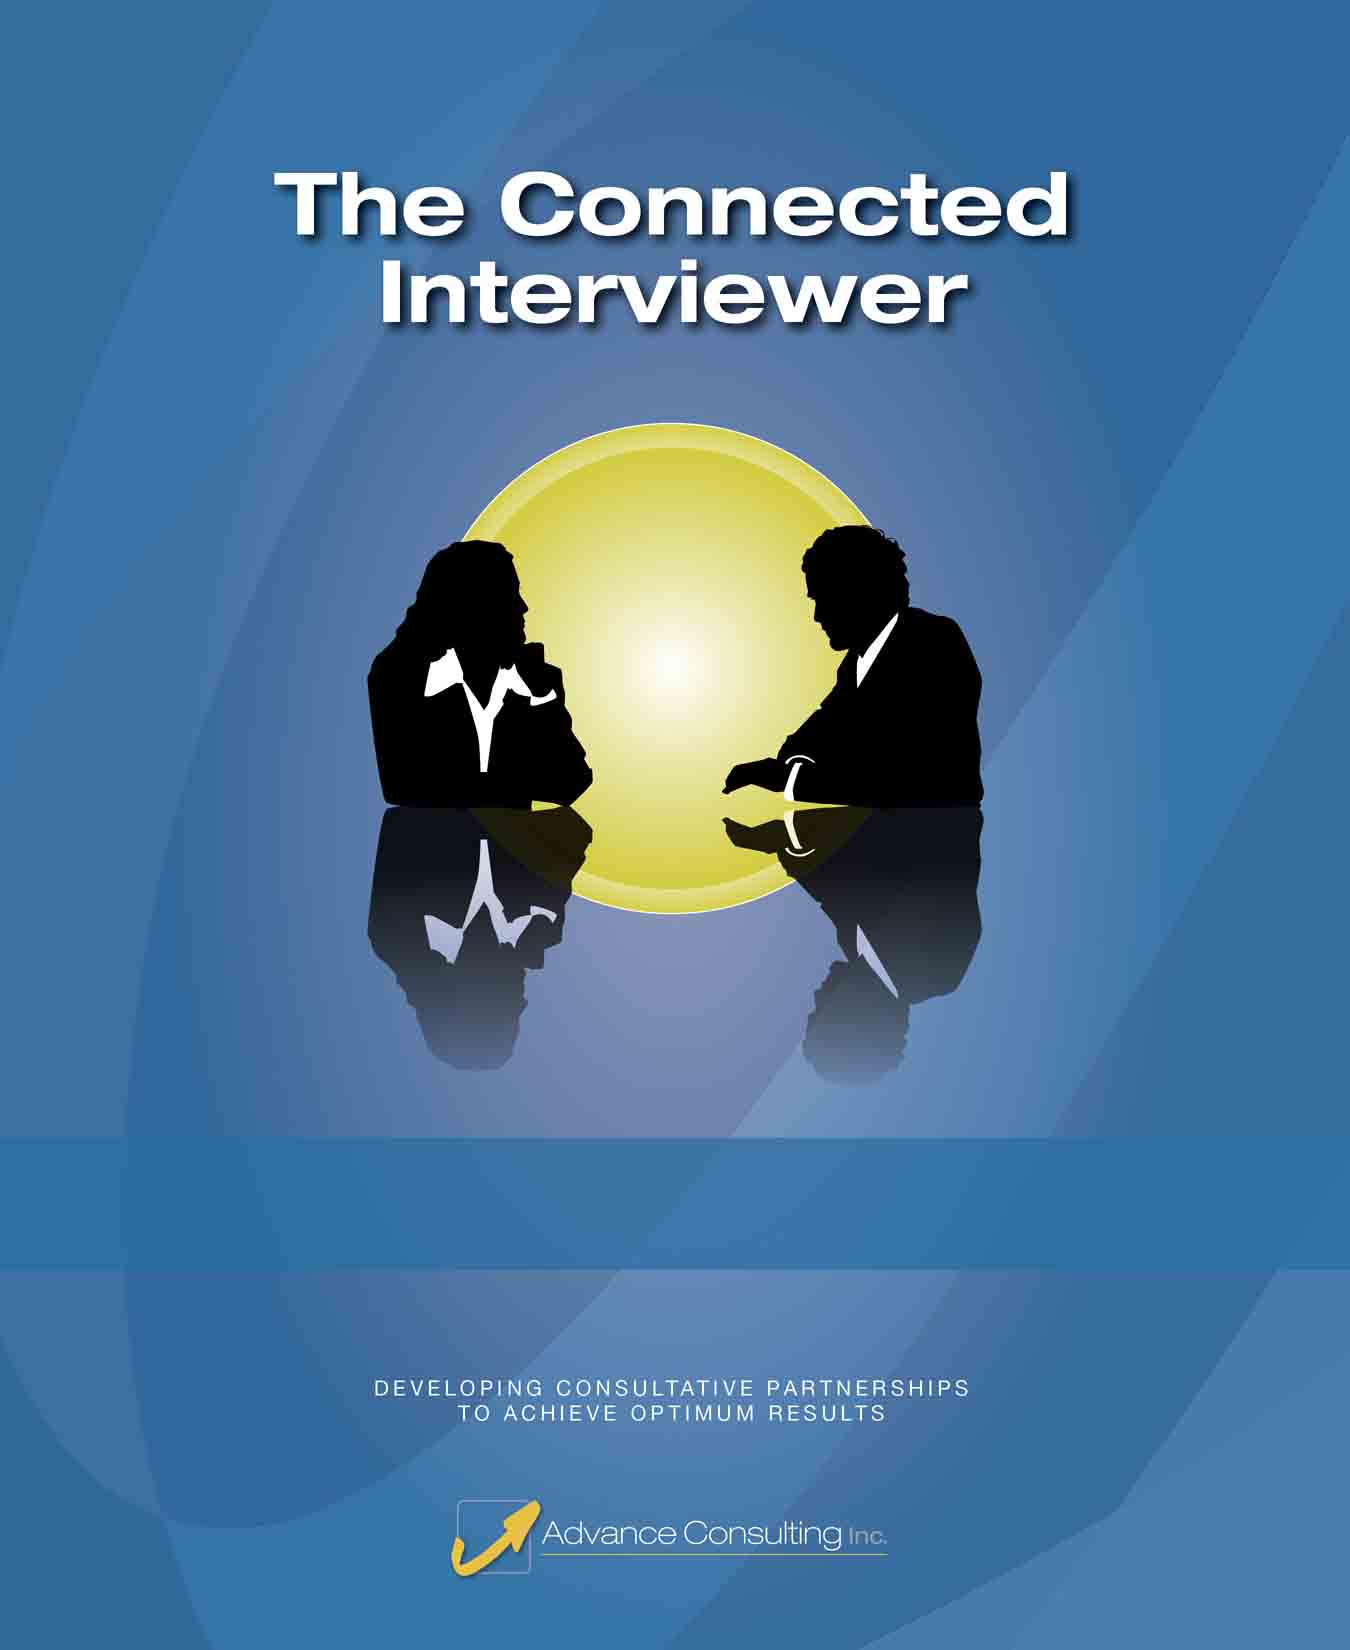 The Connected Interviewer